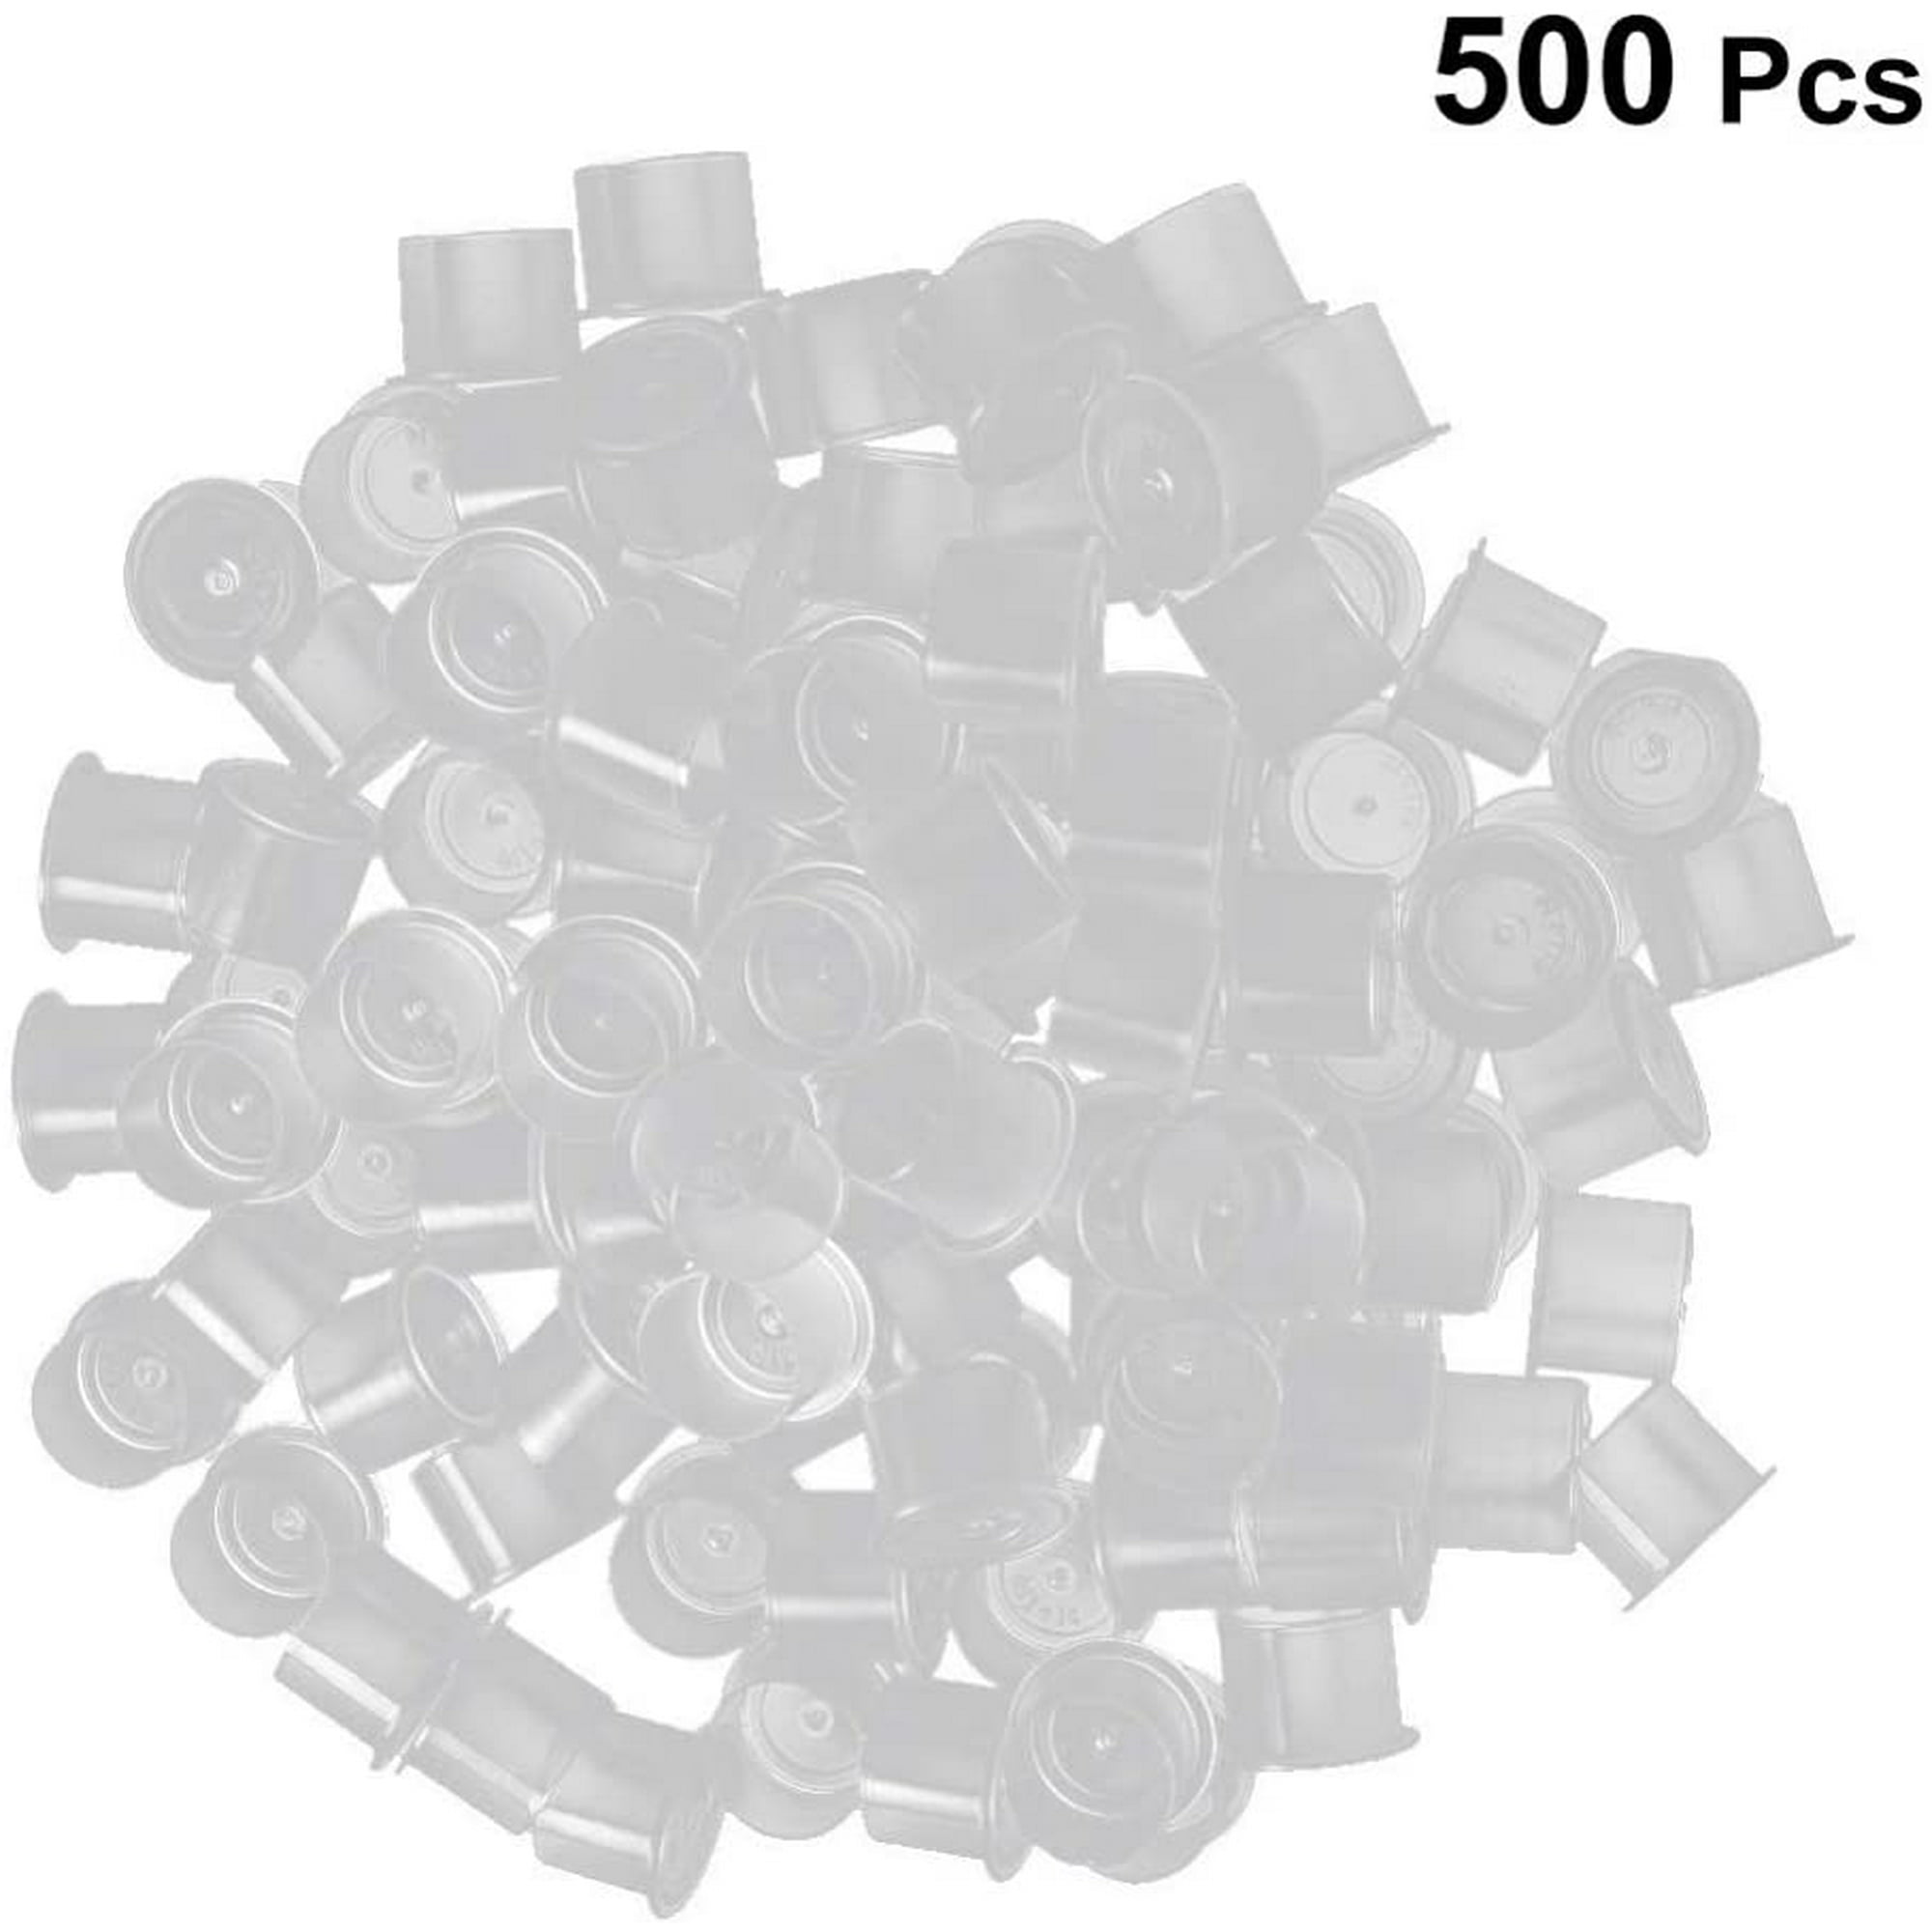 500pcs Tattoo Ink Caps Plastic Disposable Tattoo Ink Cups for Tattoo  Permanent Makeup Container Cap Tattoo Accessory Tattoo Ink Tattoo Supplies  (Size) | Walmart Canada